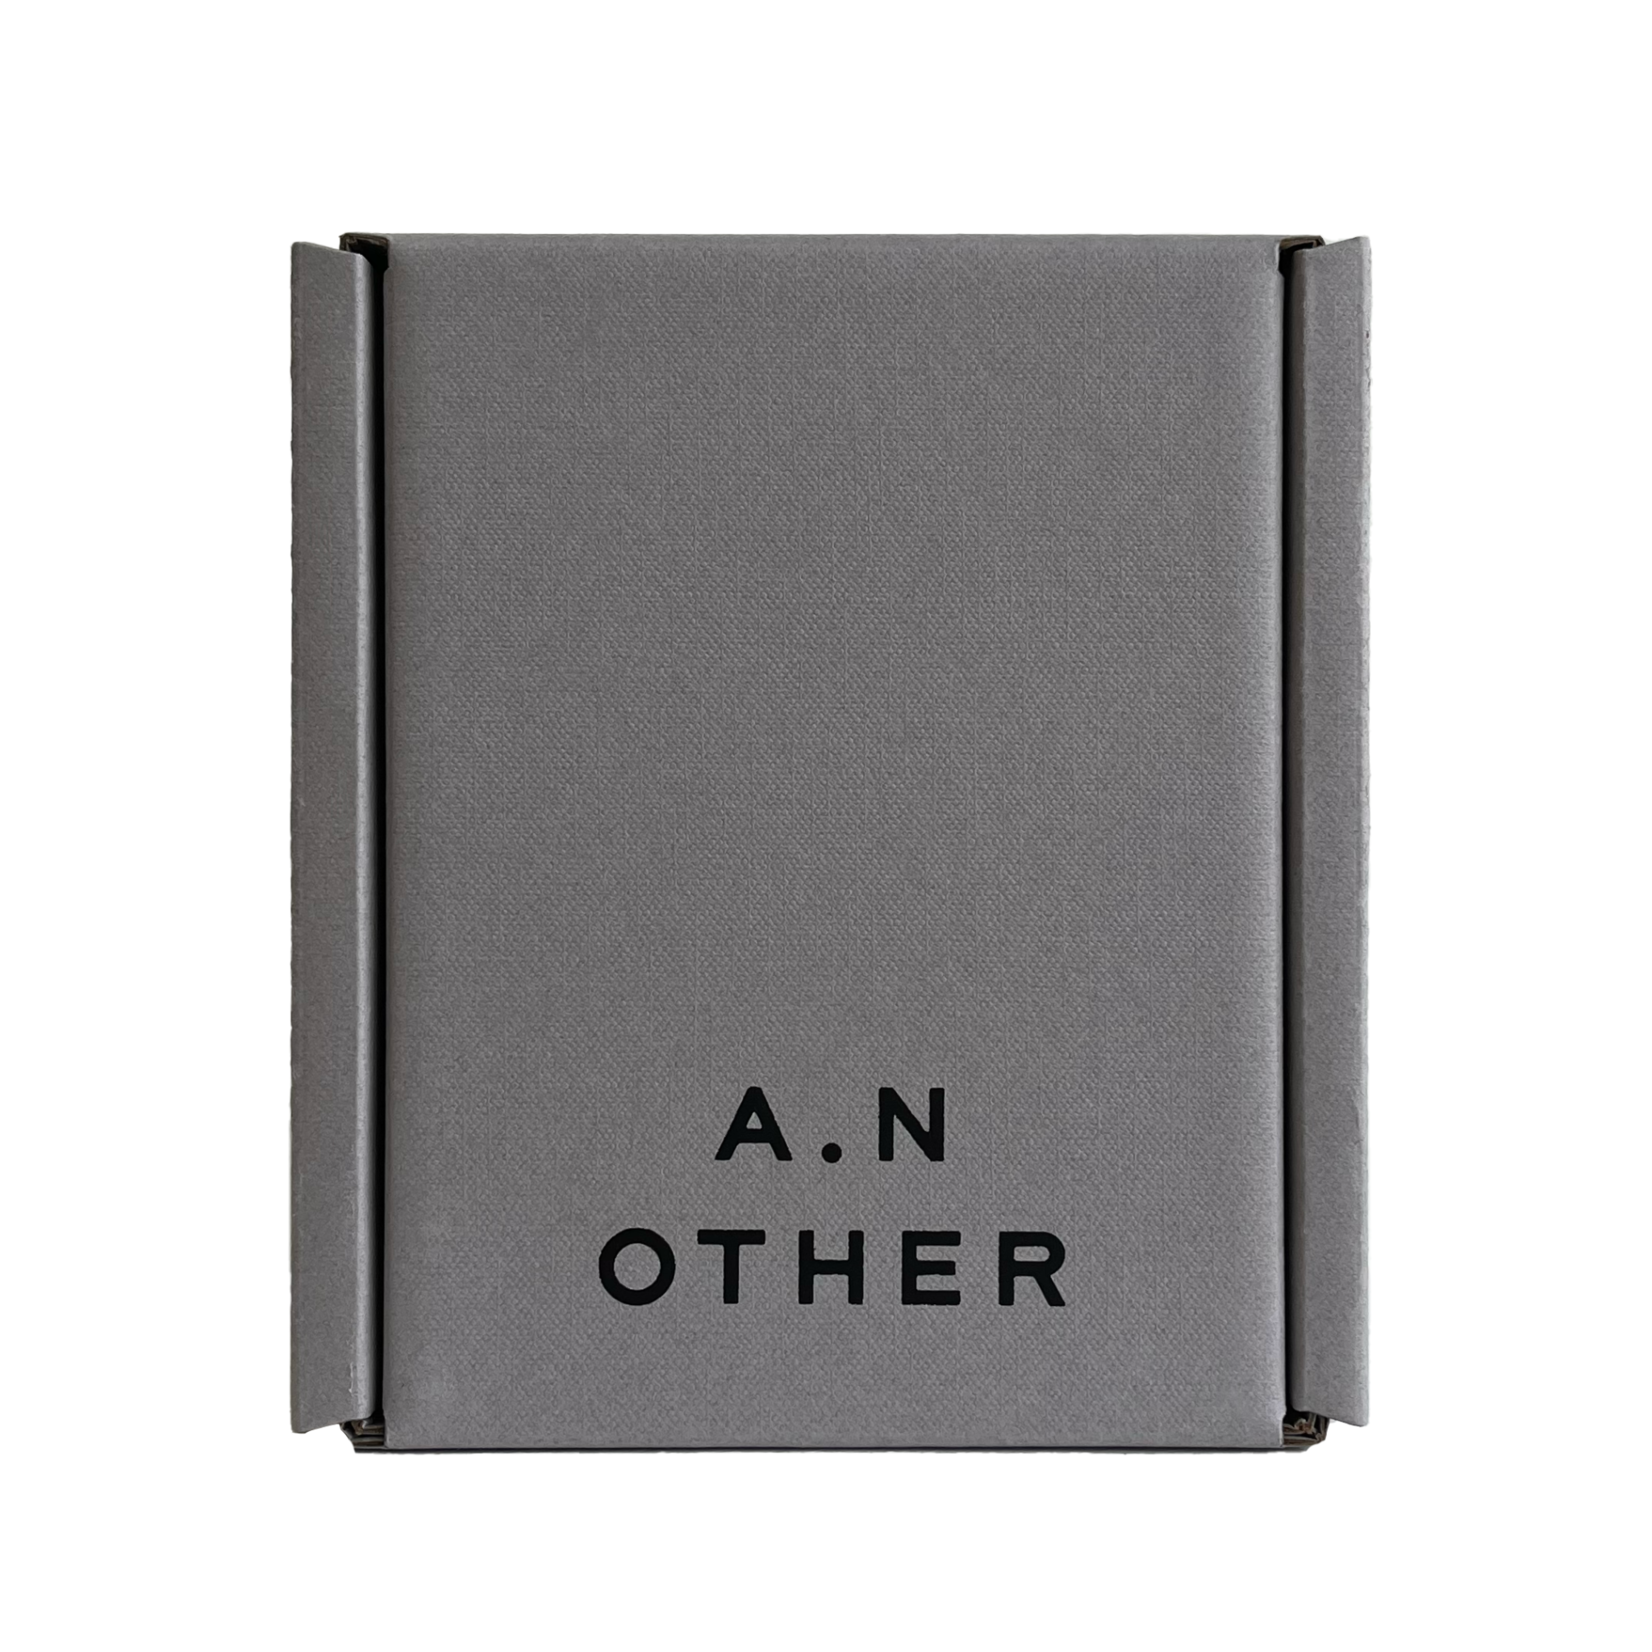 A.N. OTHER A.N. OTHER WD/2018 50 ml